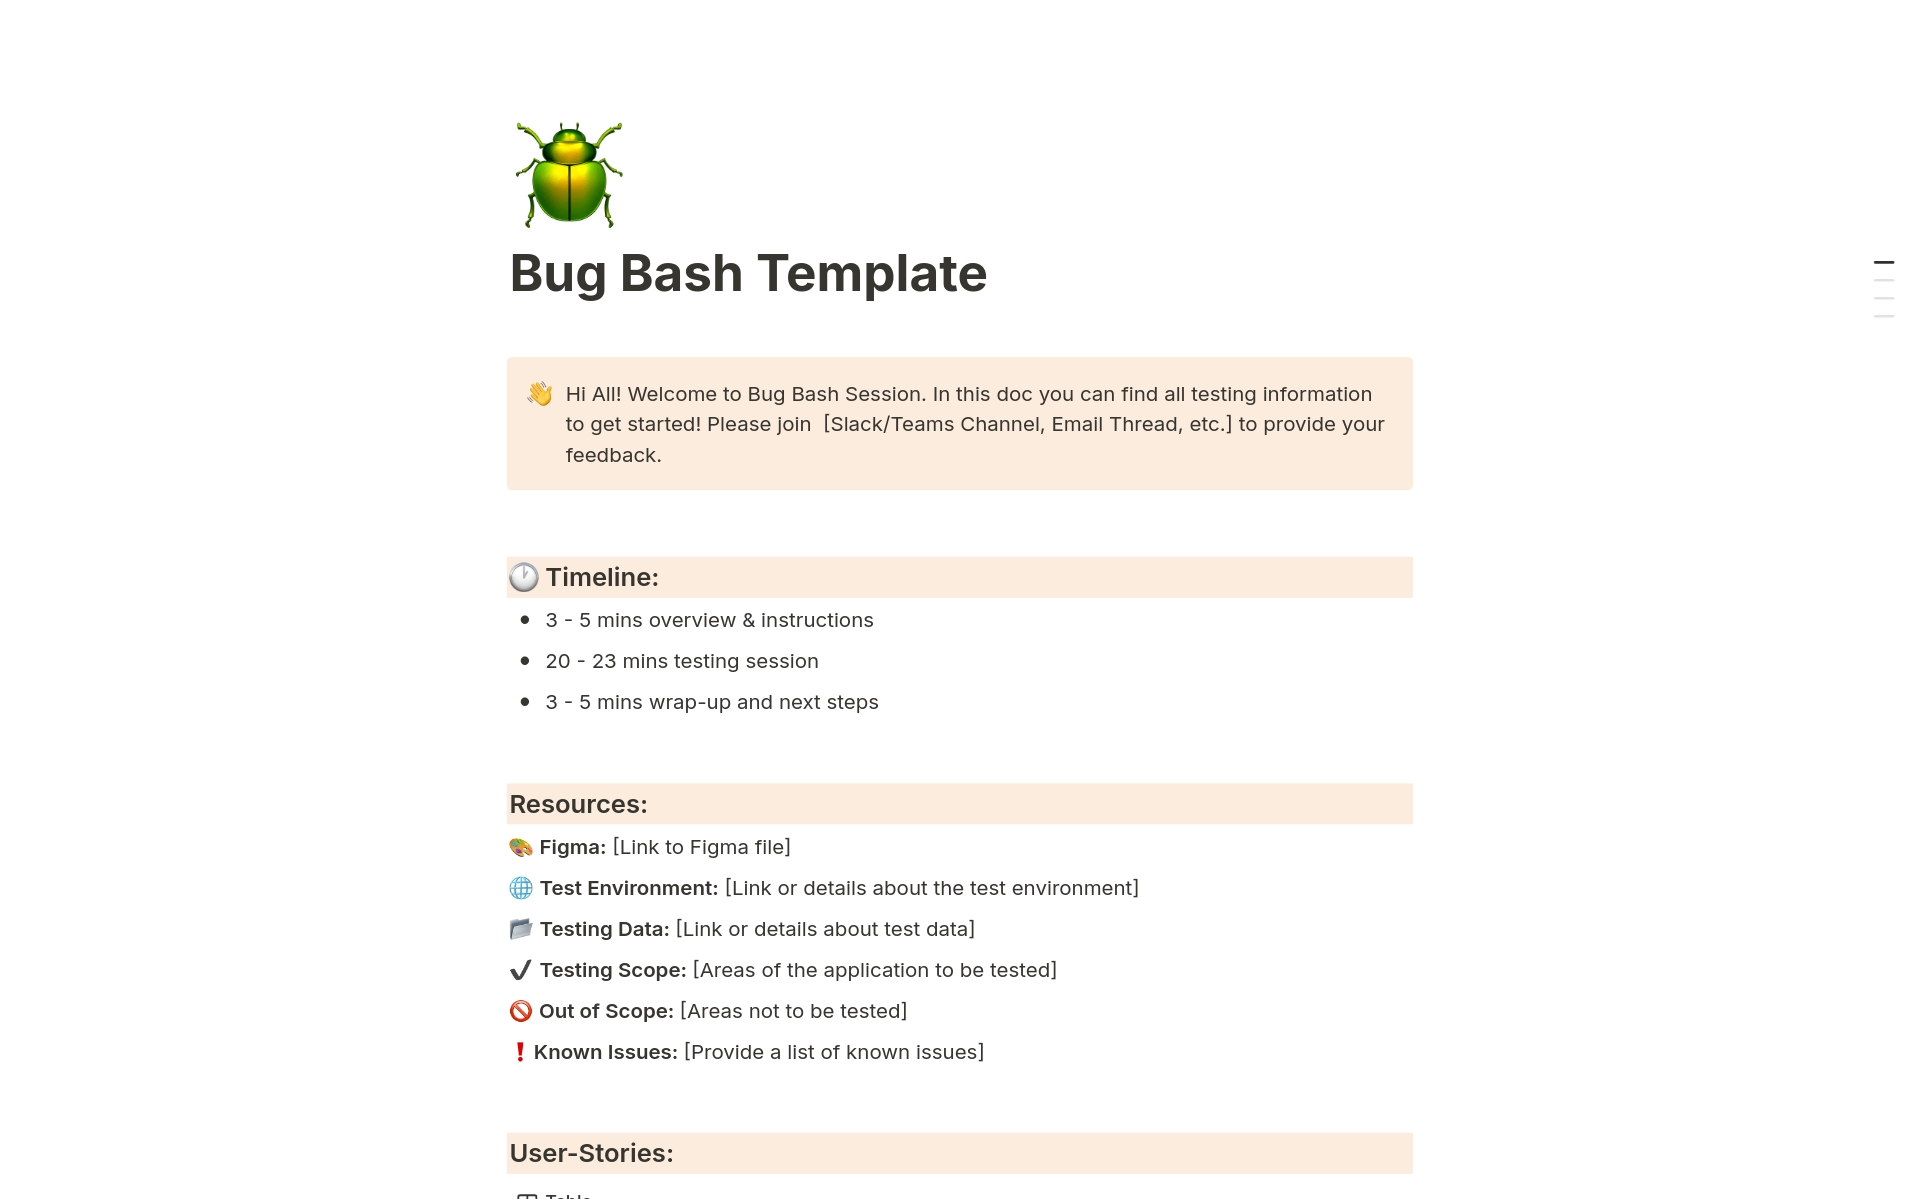 The purpose of this Bug Bash template is to provide a structured approach to planning, executing, and documenting the Bug Bash event. 